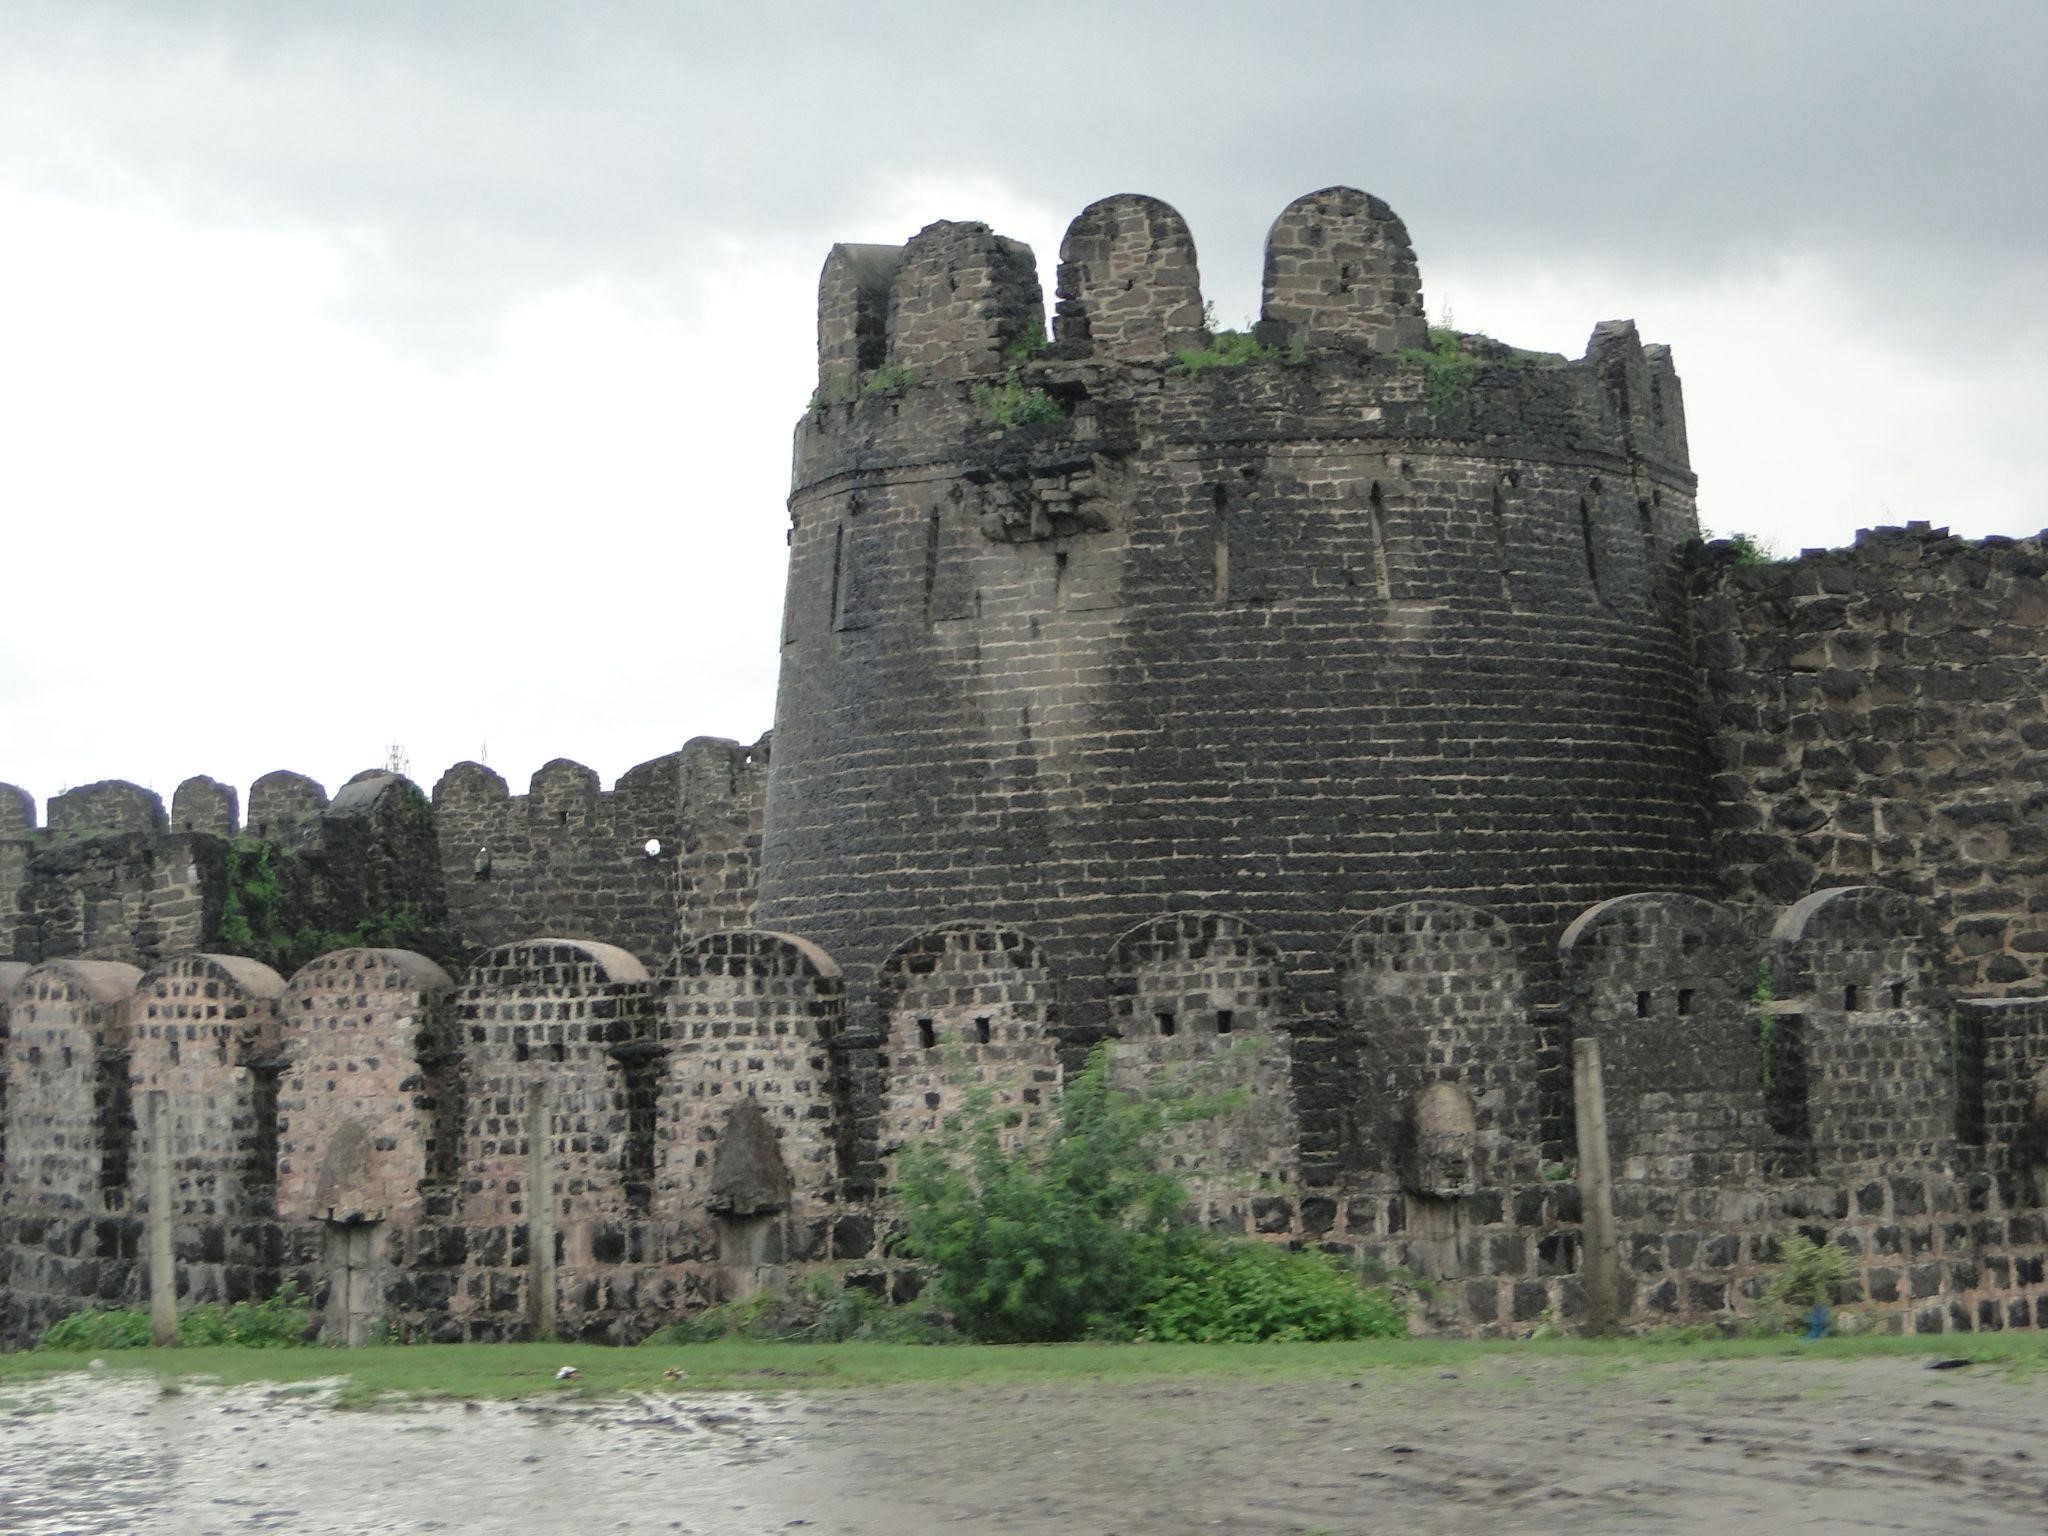 The Gulbarga fort: an old yet awe-inspiring structure